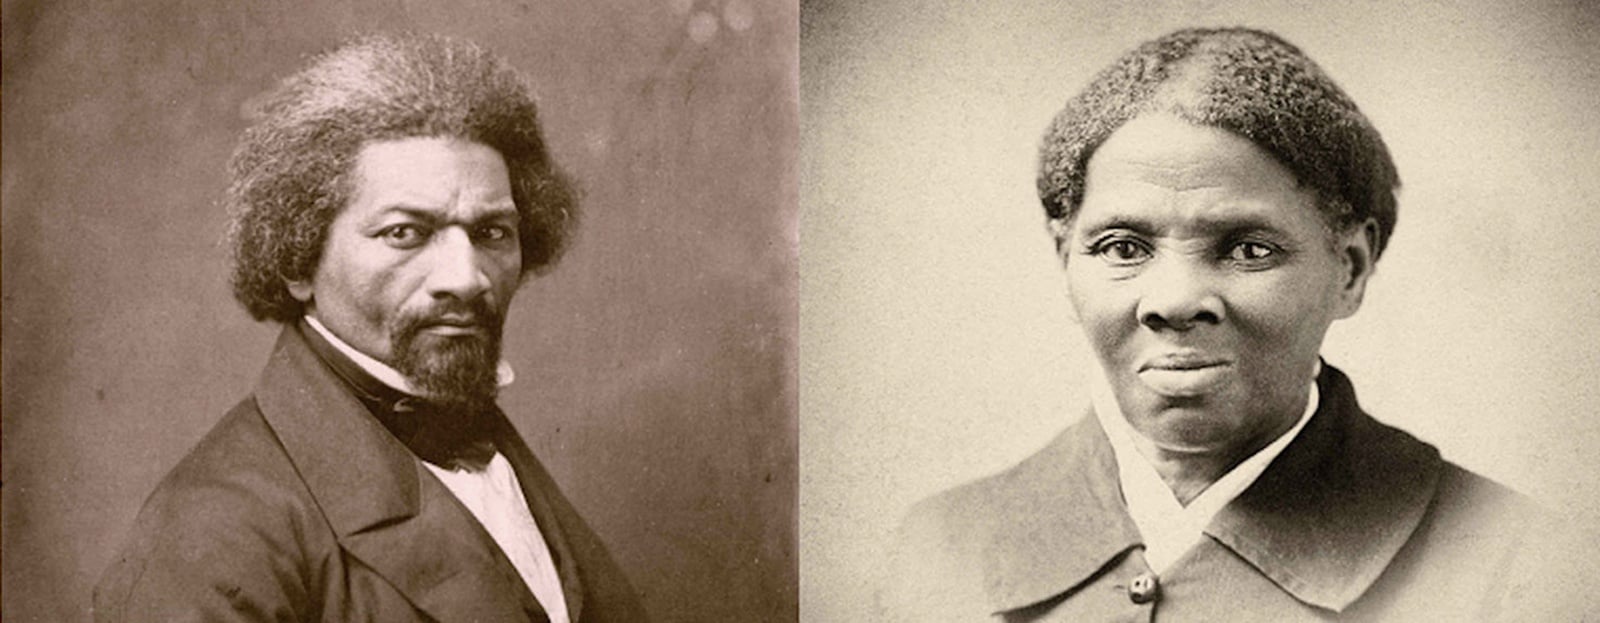 WFMT Classical Conversations - Becoming Frederick Douglass and Harriet Tubman: Visions of Freedom